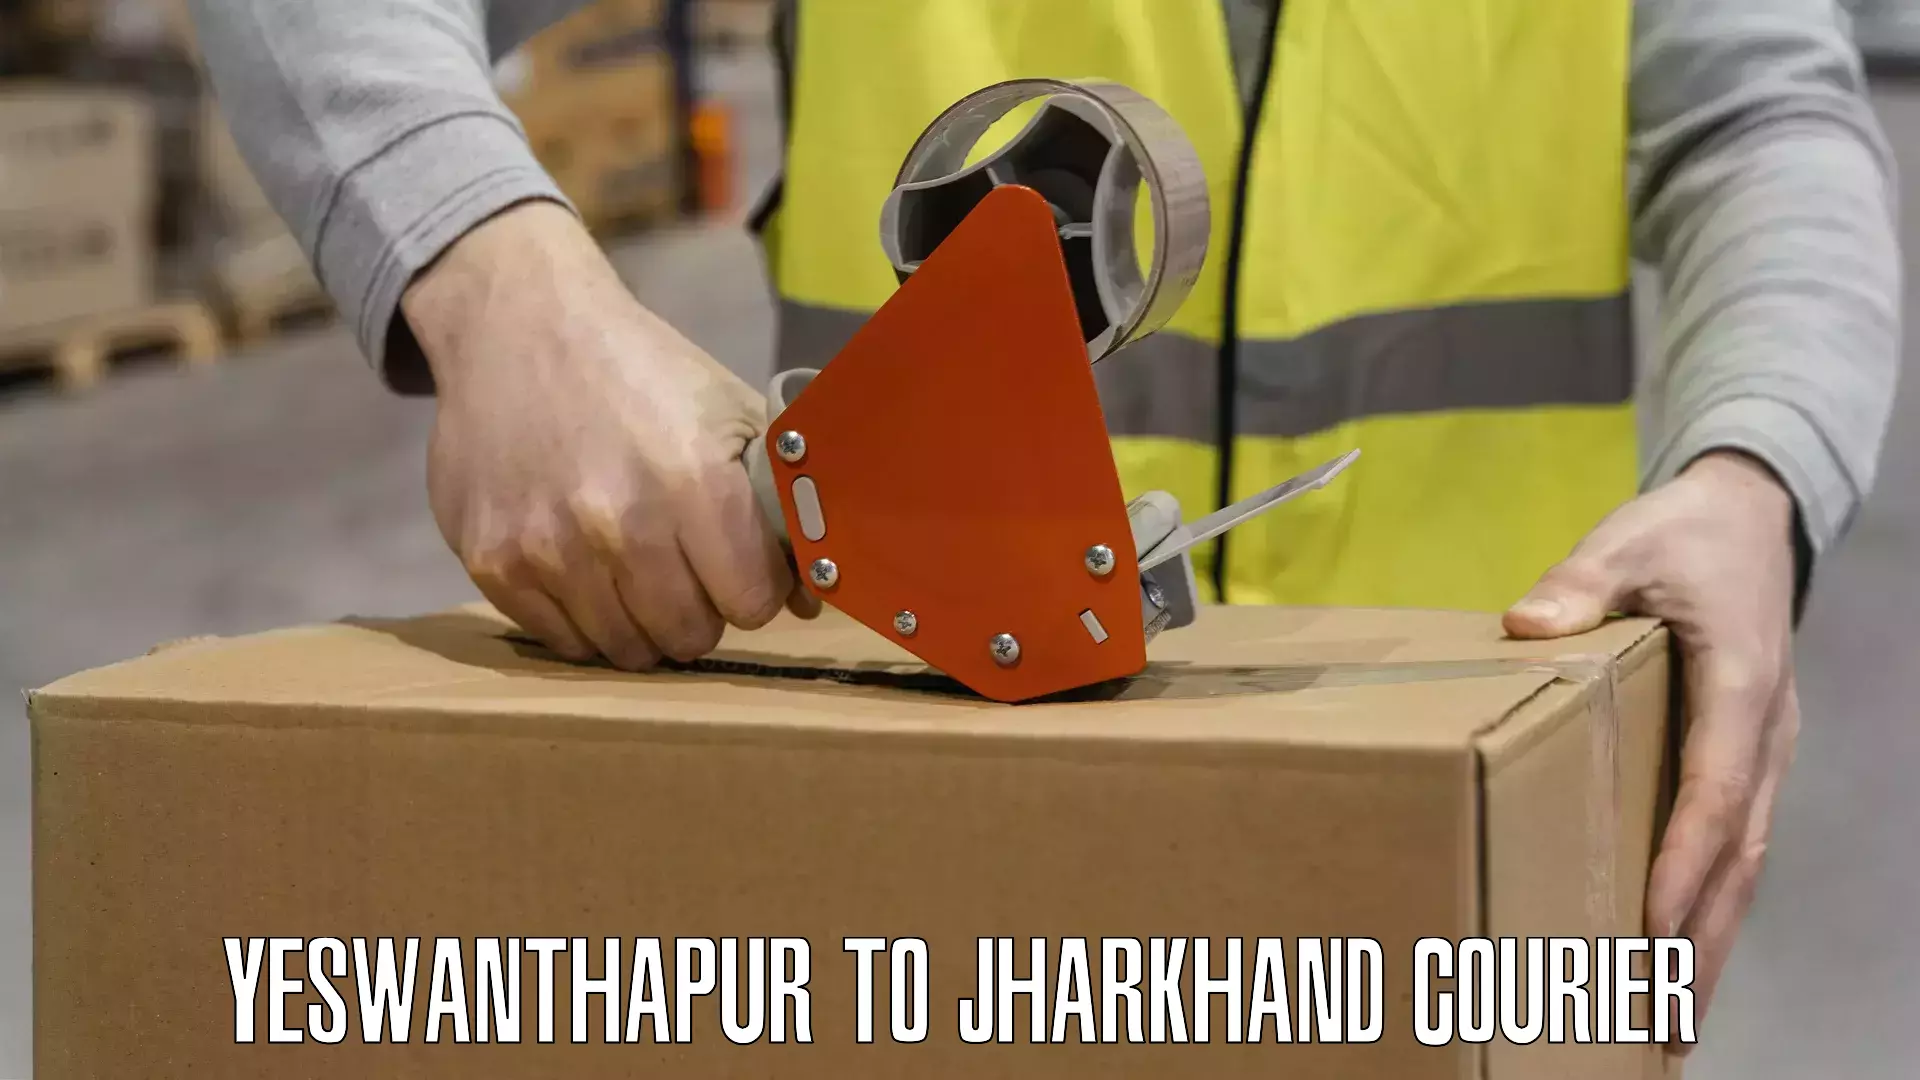 Flexible delivery schedules Yeswanthapur to Jharkhand